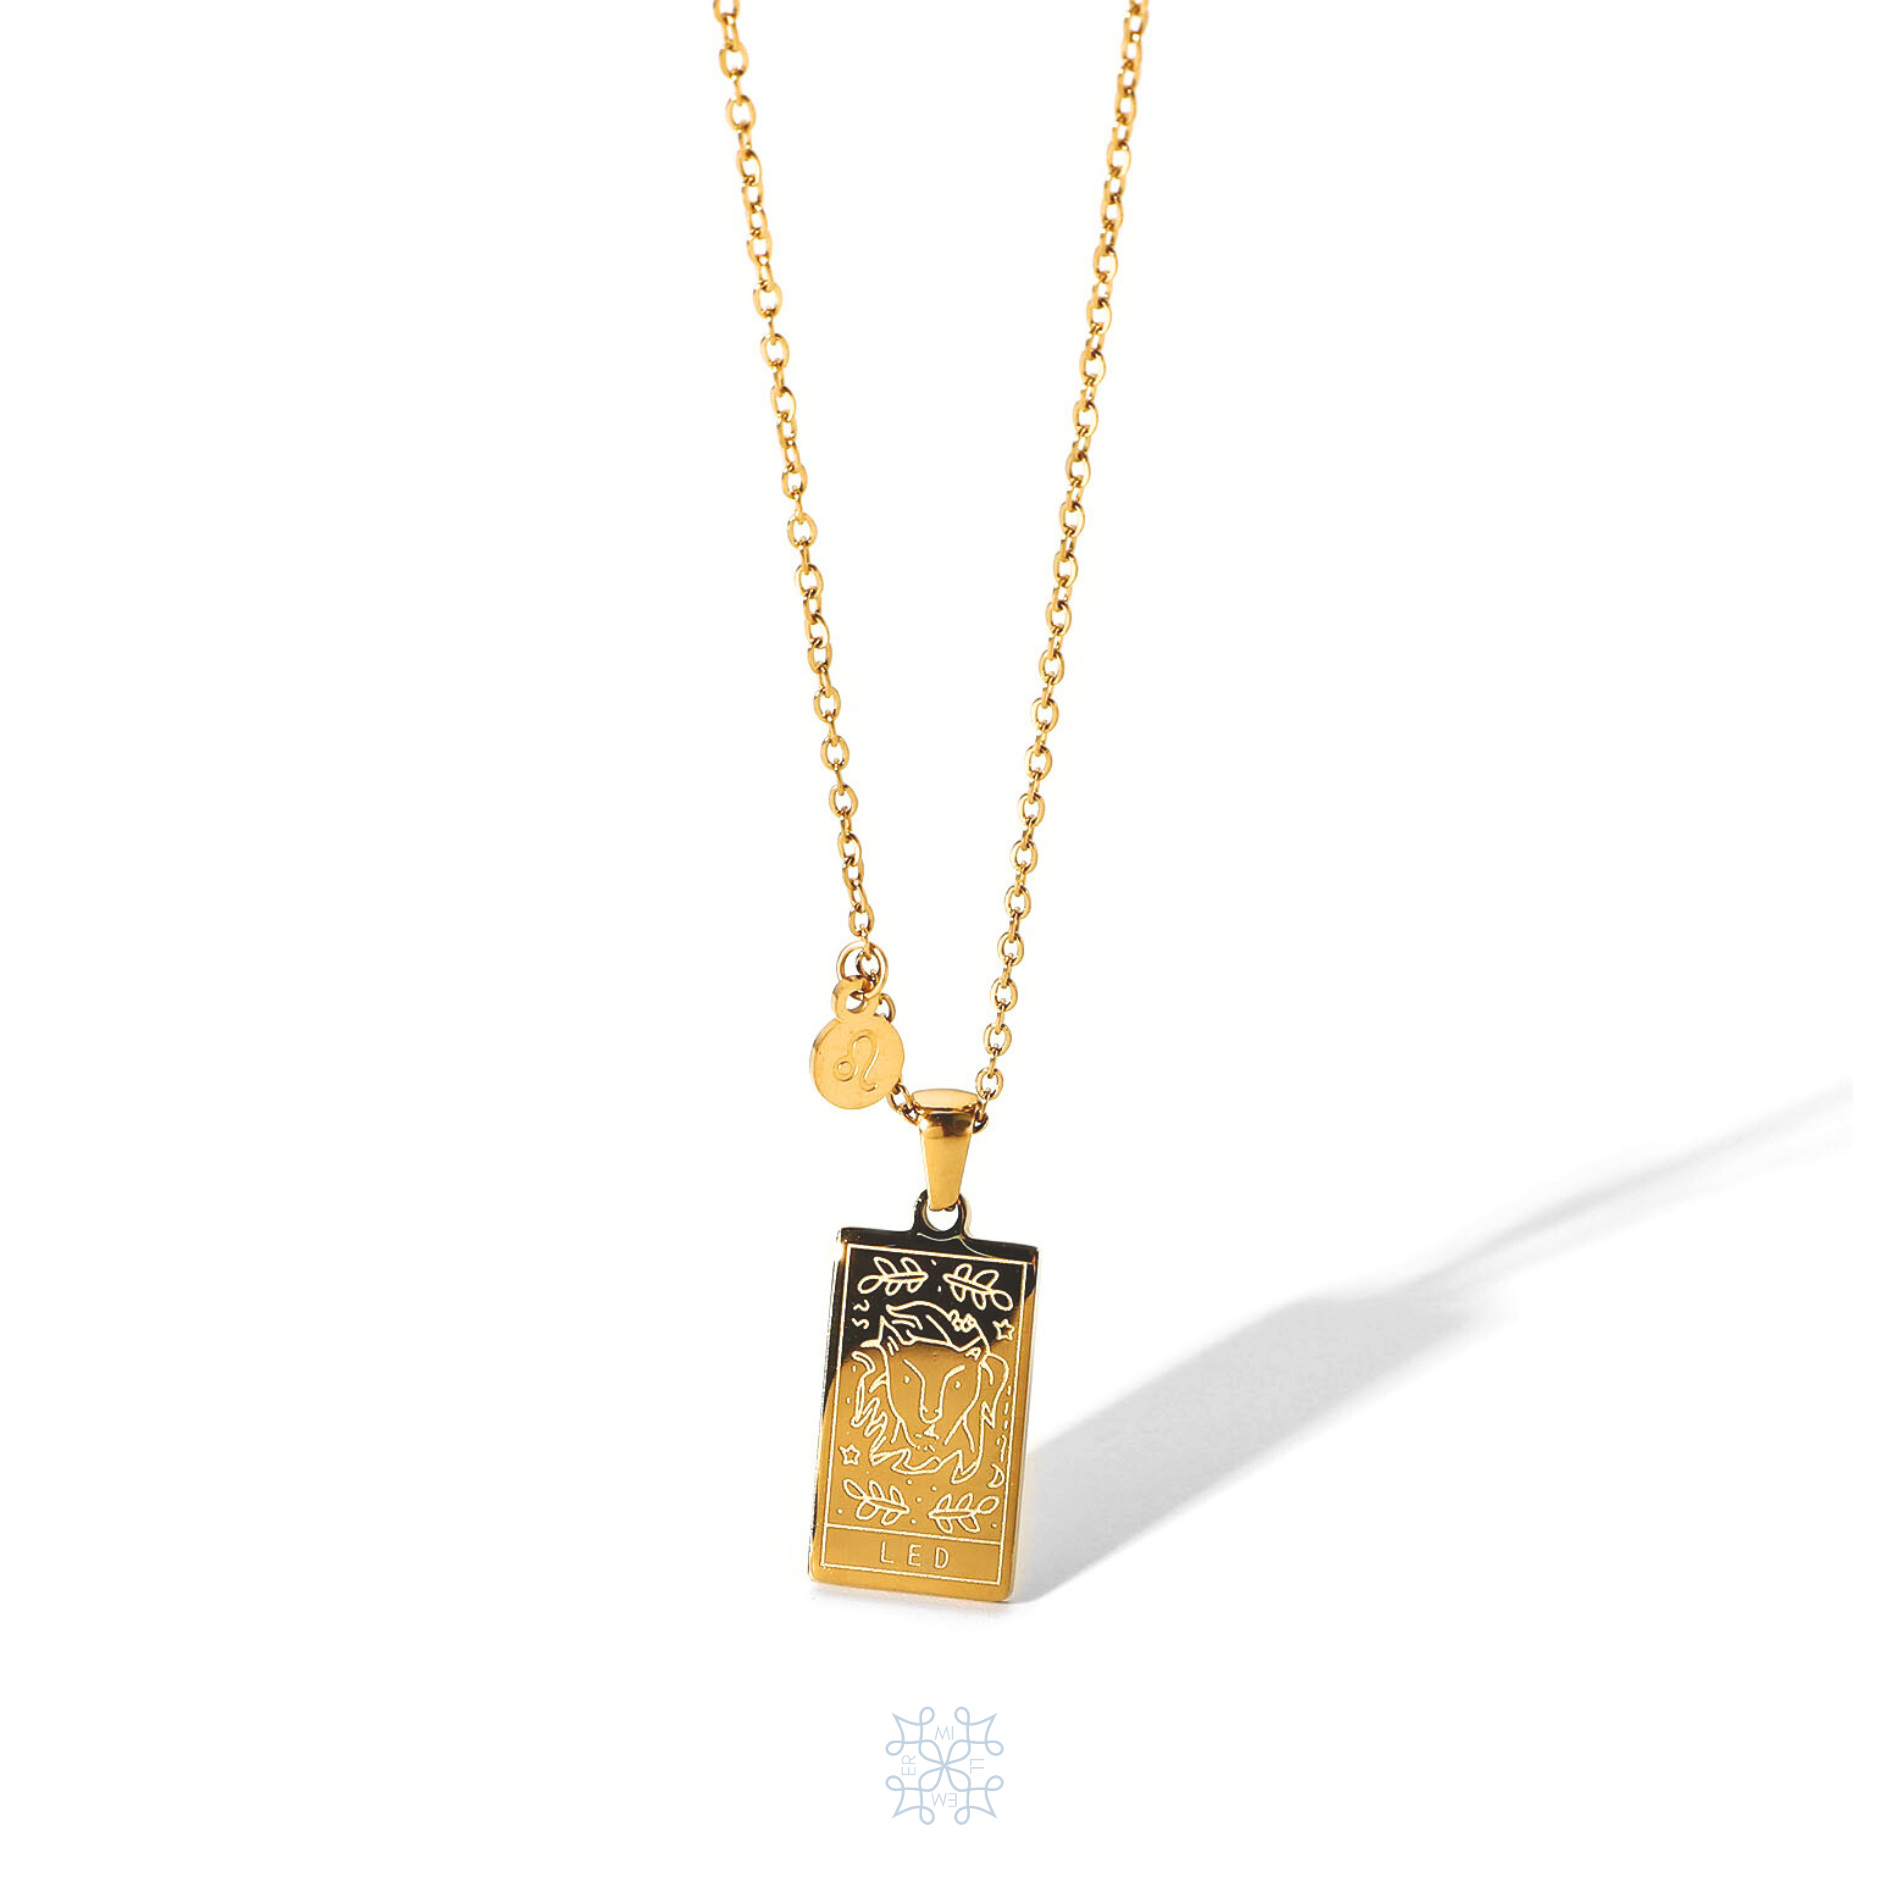 Rectangular gold pendant with Leo engraved and the word Leo in the bottom. Gold pendant with a chain necklace. In the side of the gold pendant is a circle small medallion with the symbol of Leo engraved on it. Leo zodiac pendant gold necklace.